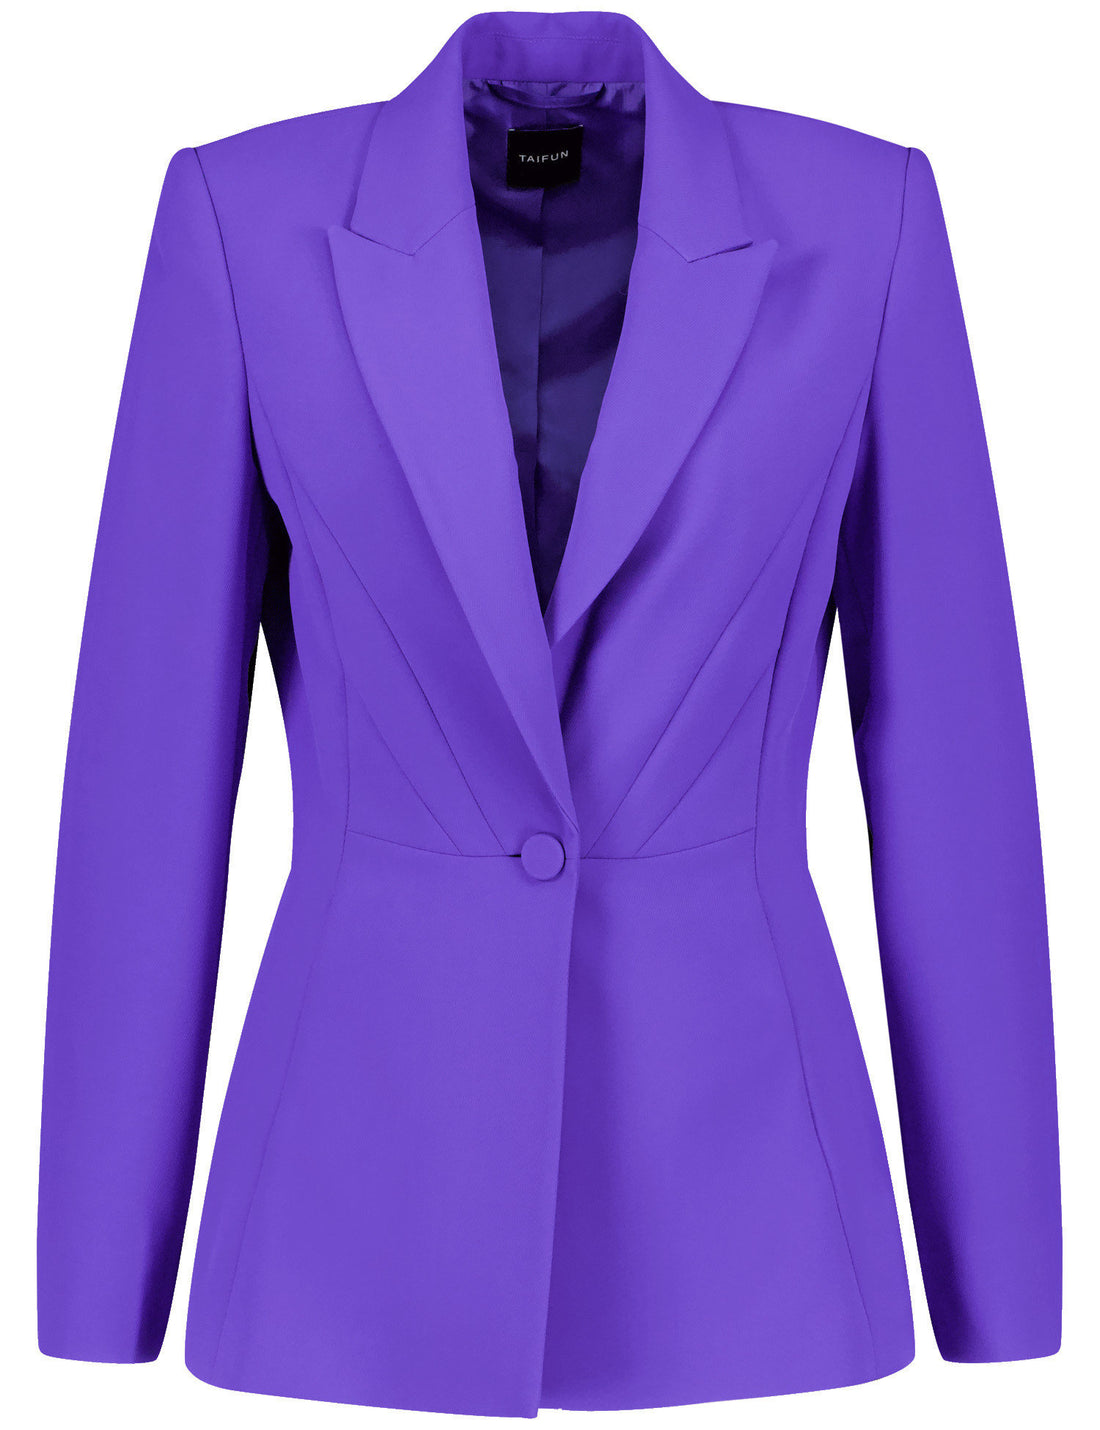 Fitted Blazer Made Of Fine Fabric_530302-11054_8810_02